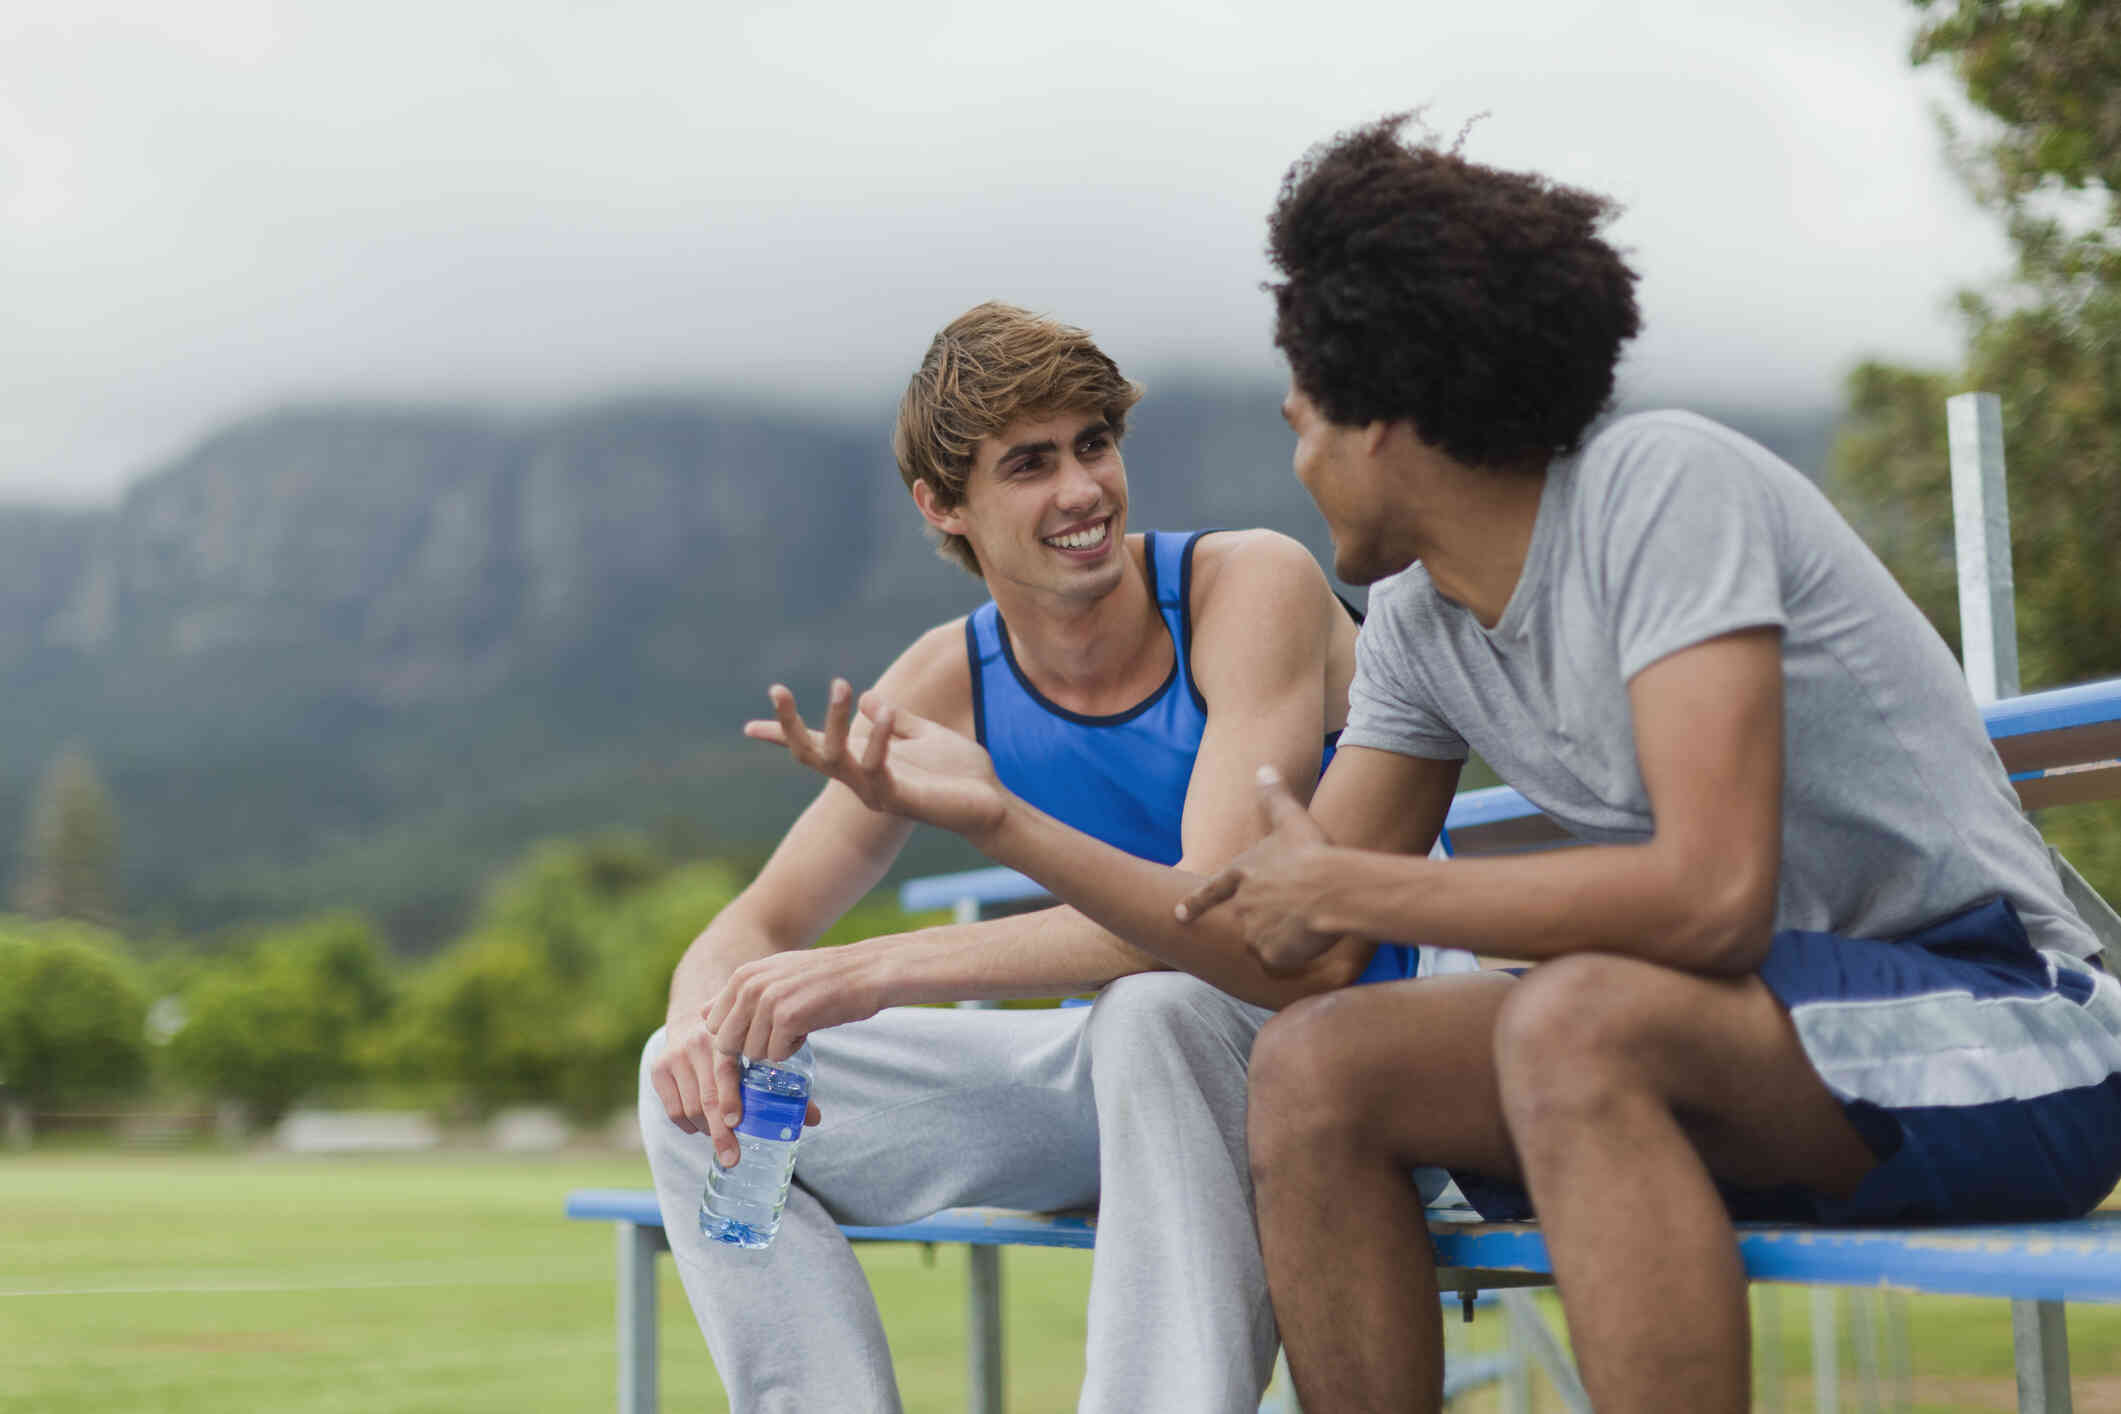 Two men in workout clothes sits on the bleachers and talk while outside on a windy day.